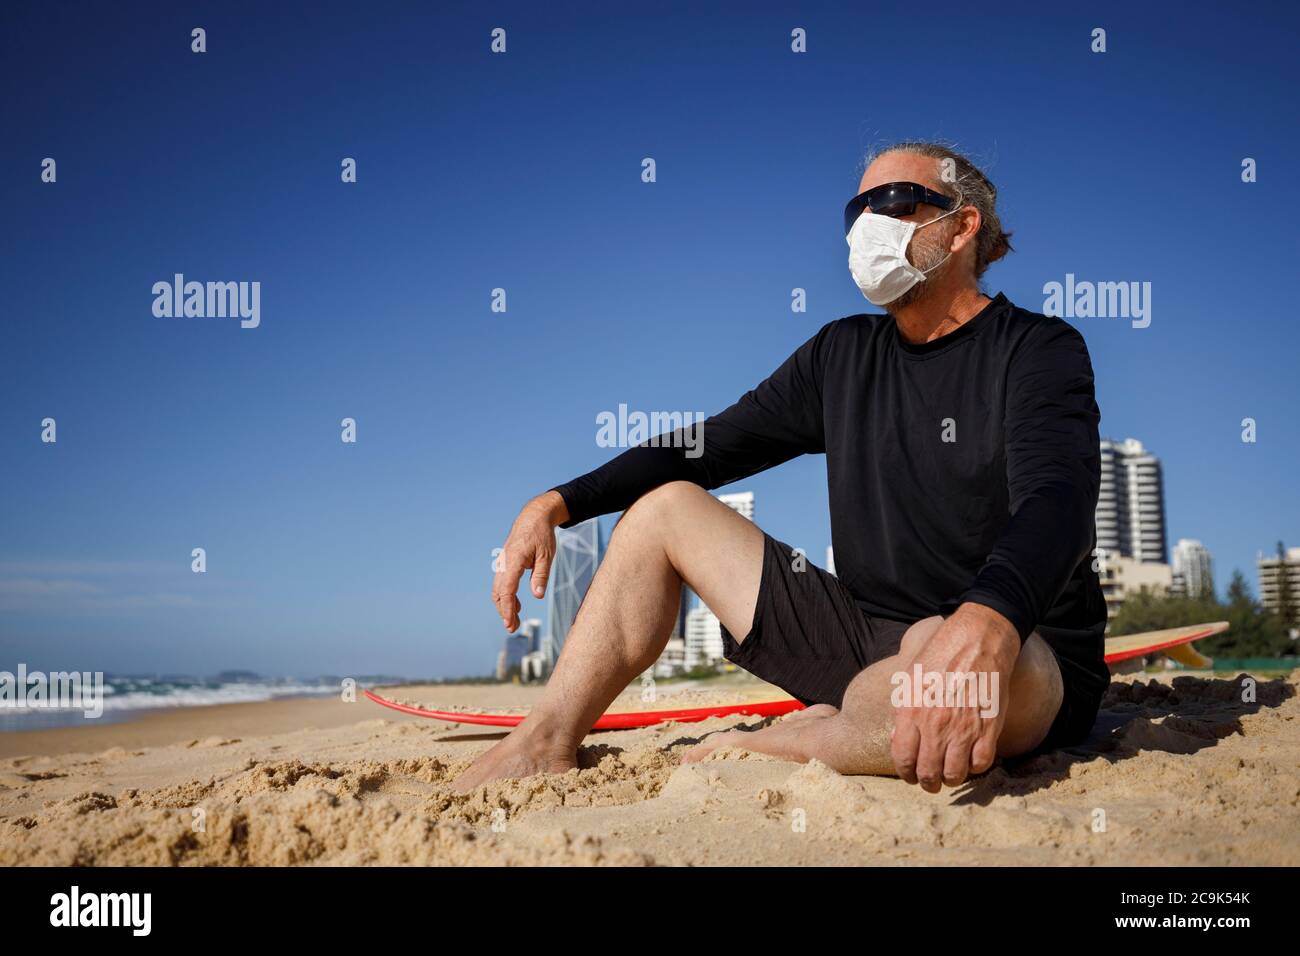 man with medical mask sitting on beach during coronavirus covid 19 pandemic, social distance concept, male surfer wearing face mask for protection Stock Photo